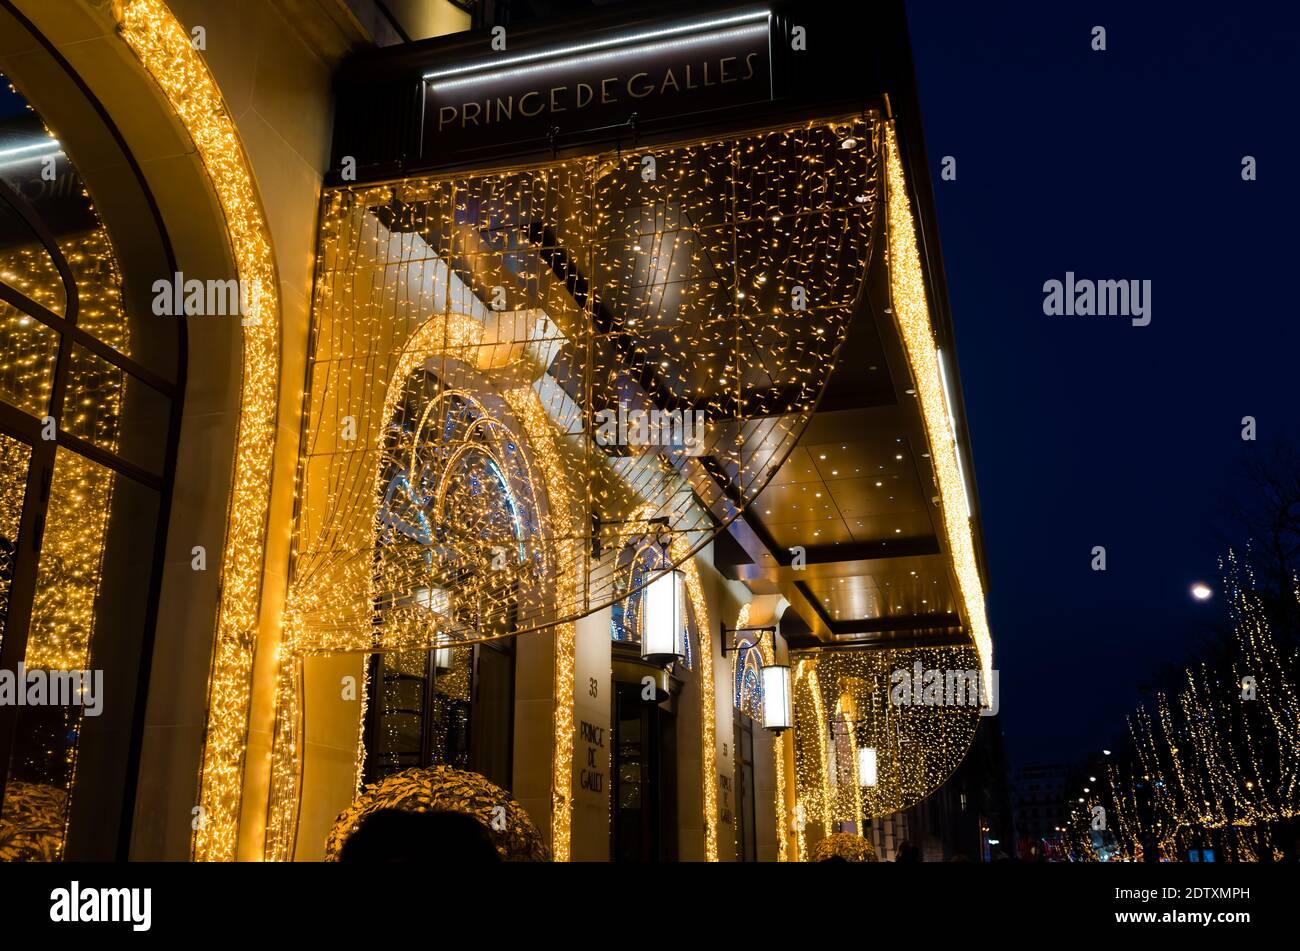 Prince de Galles Hotel with Christmas lights on avenue George V - Paris, France Stock Photo